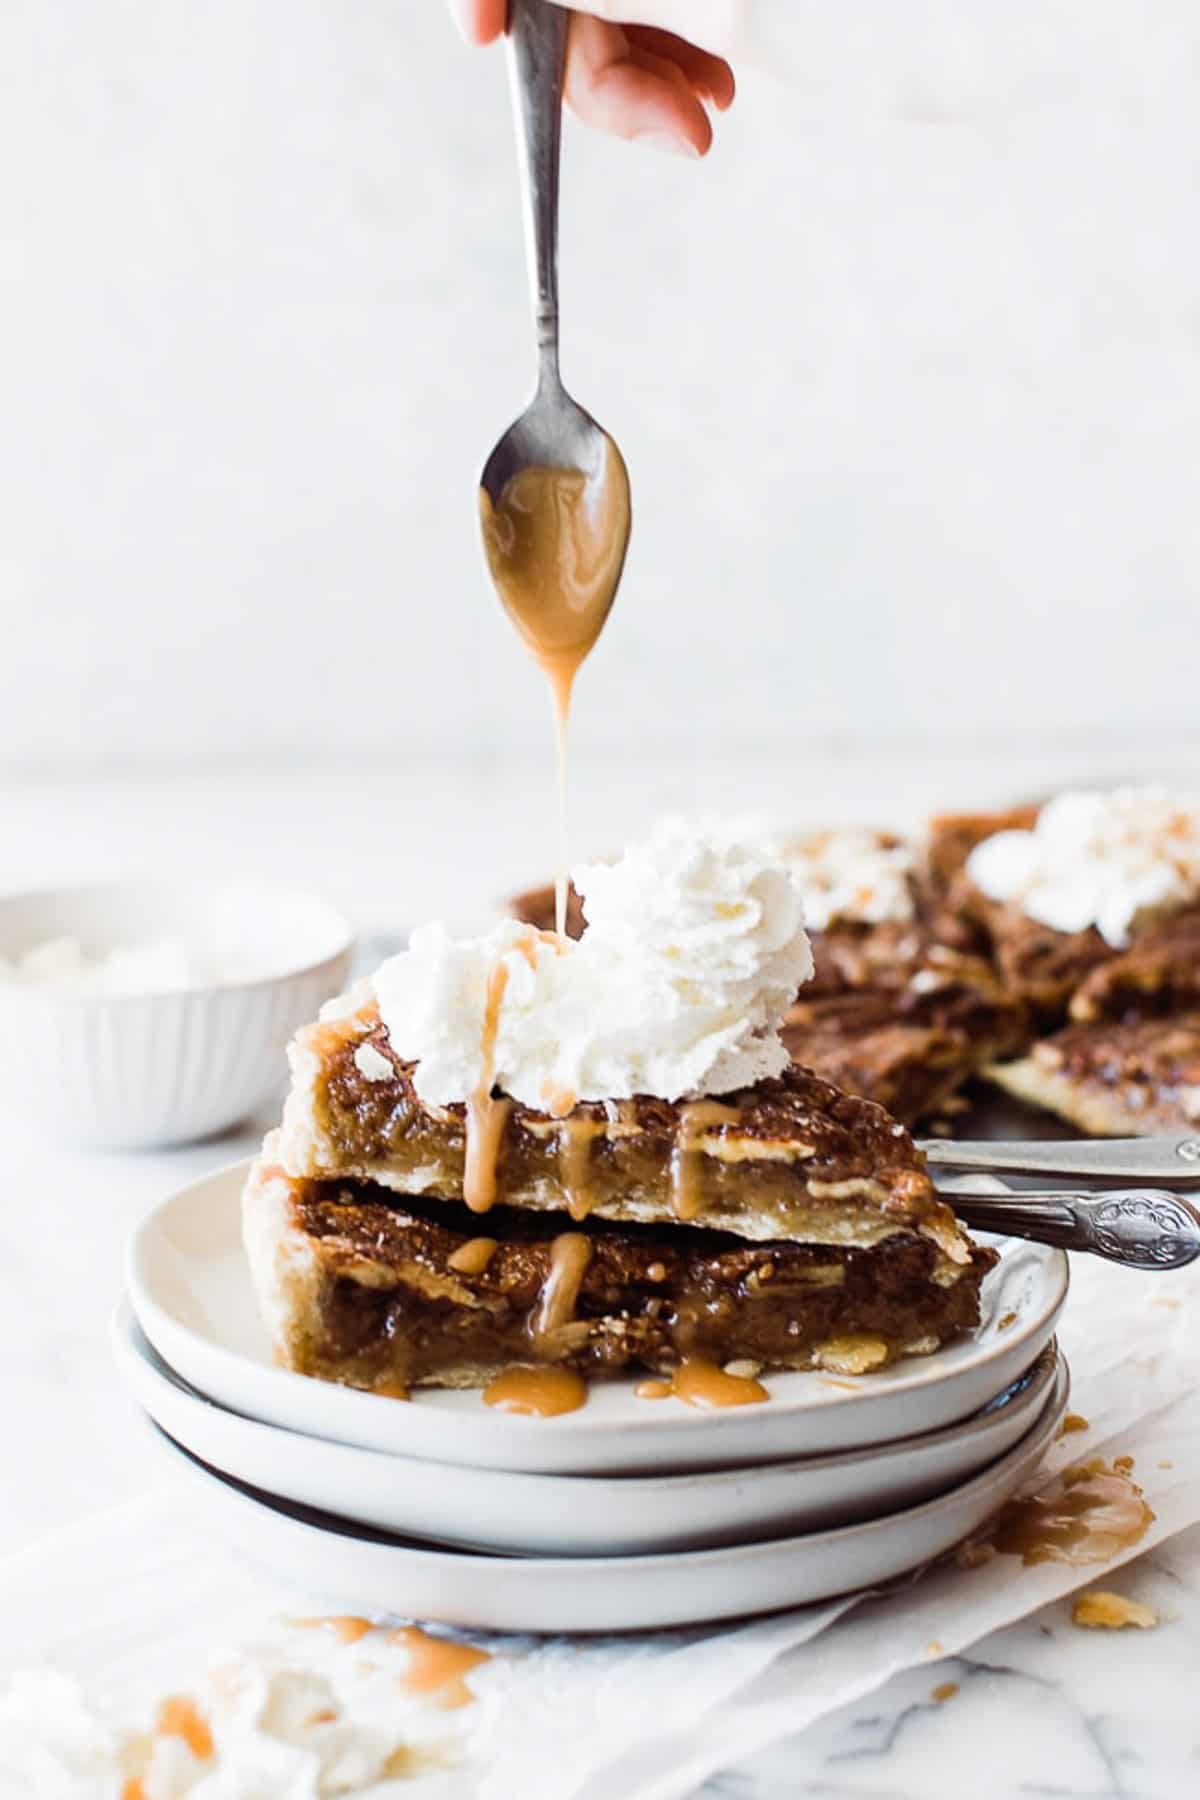 Spoon drizzling caramel sauce on two pieces of pecan pie